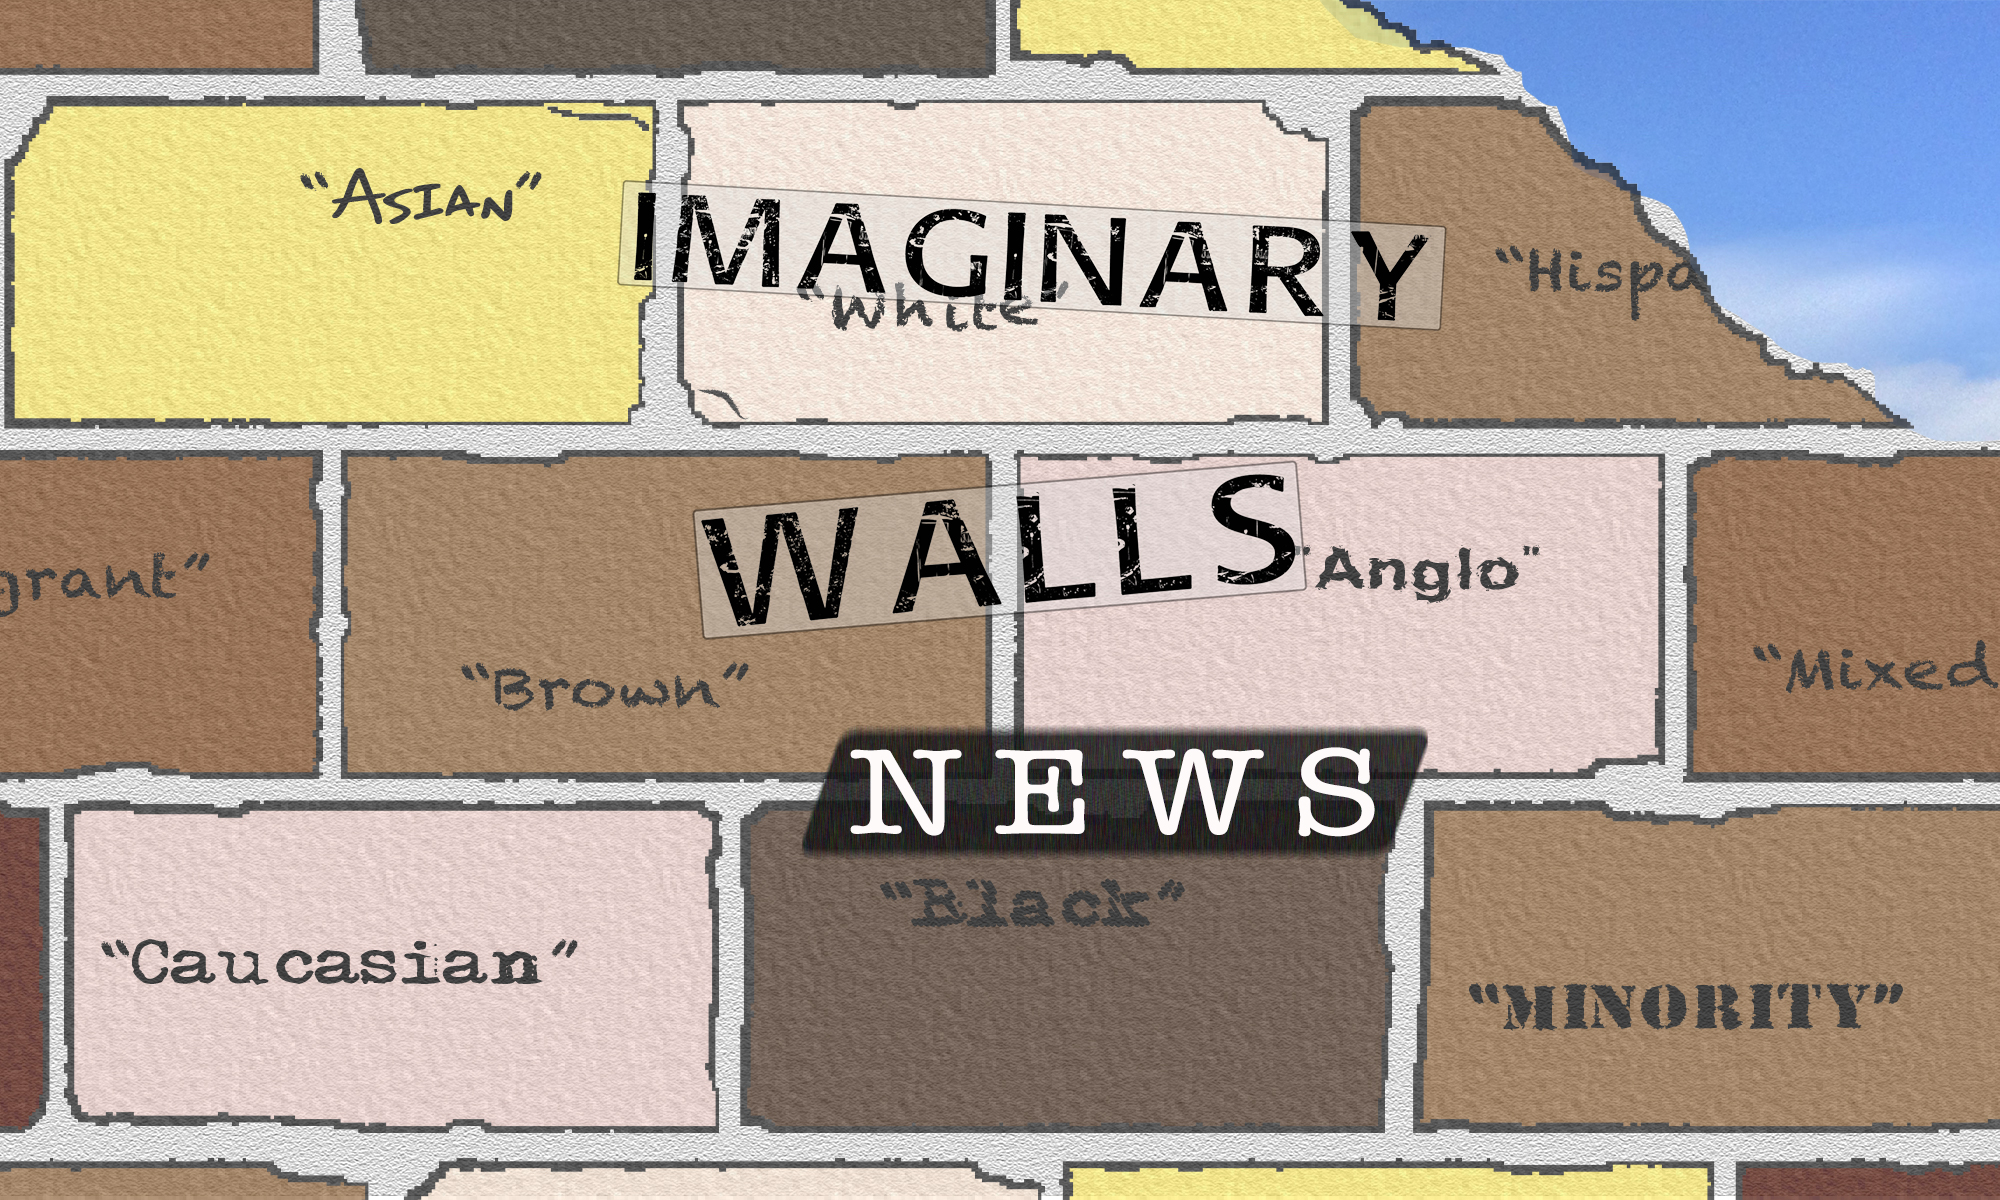 A brick wall with racialized names on it, such as "Angle," "Brown," "Hispanic"